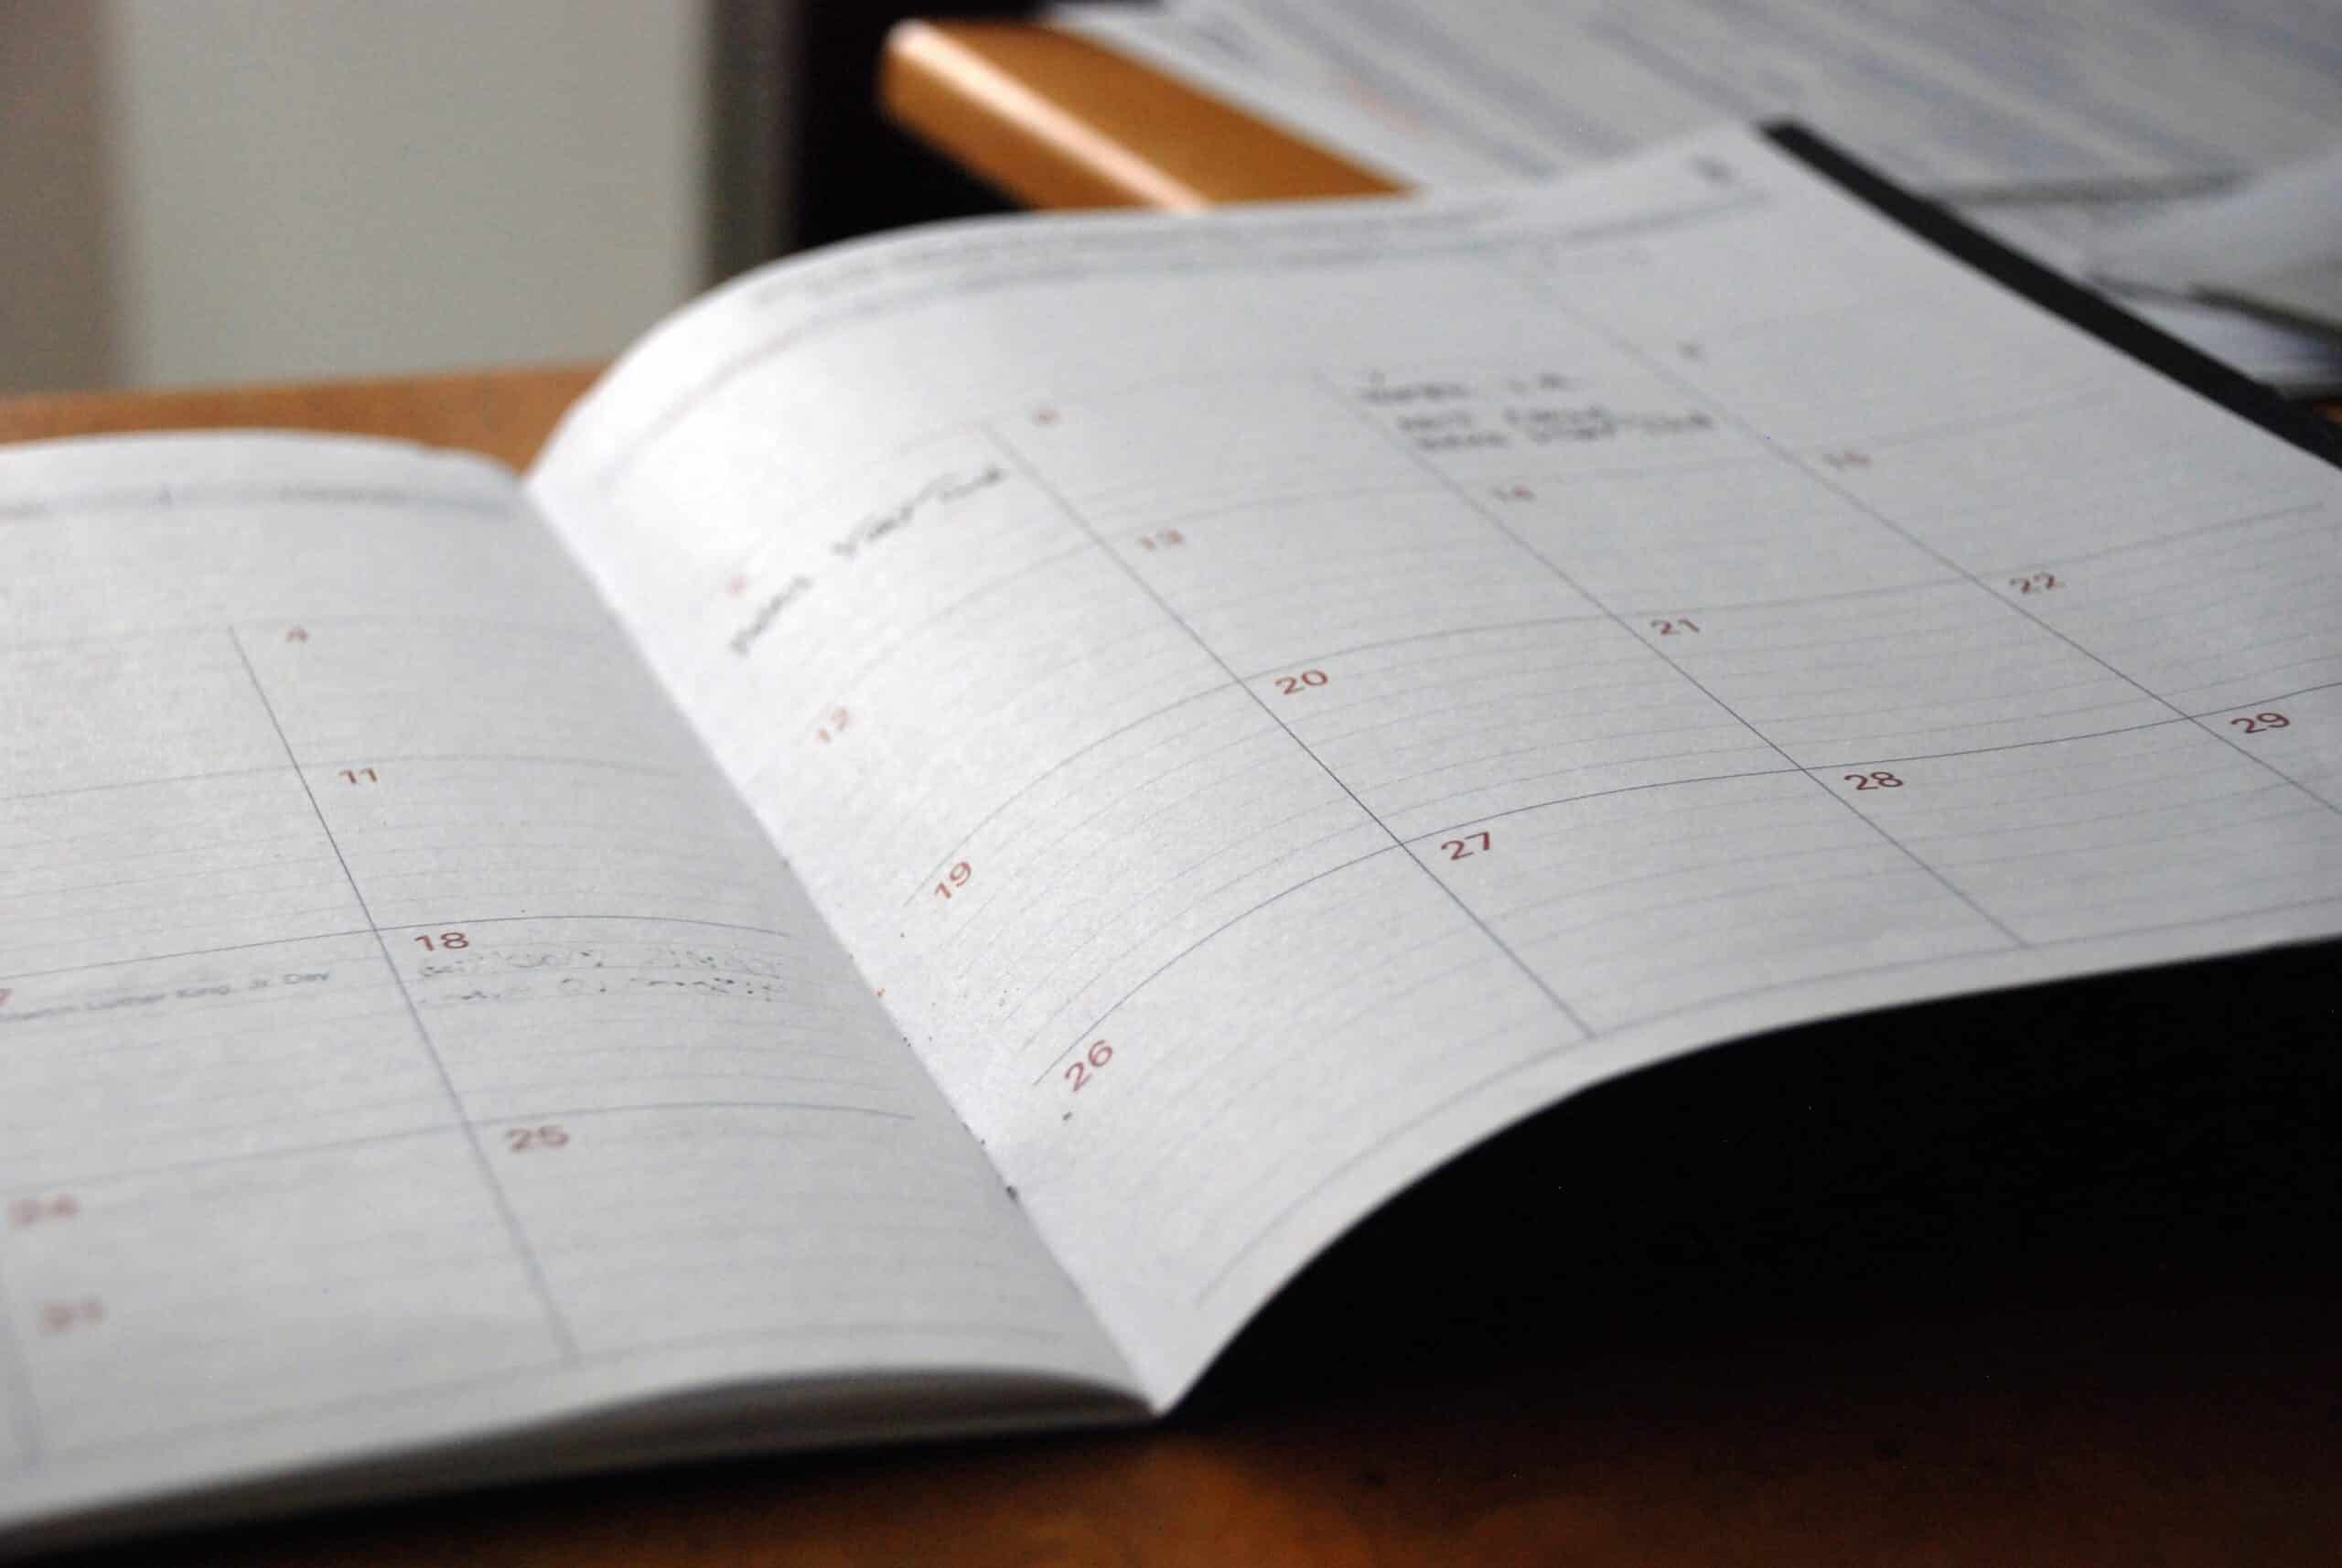 Calendar representing wrongful termination and bad faith resulting in costly damages